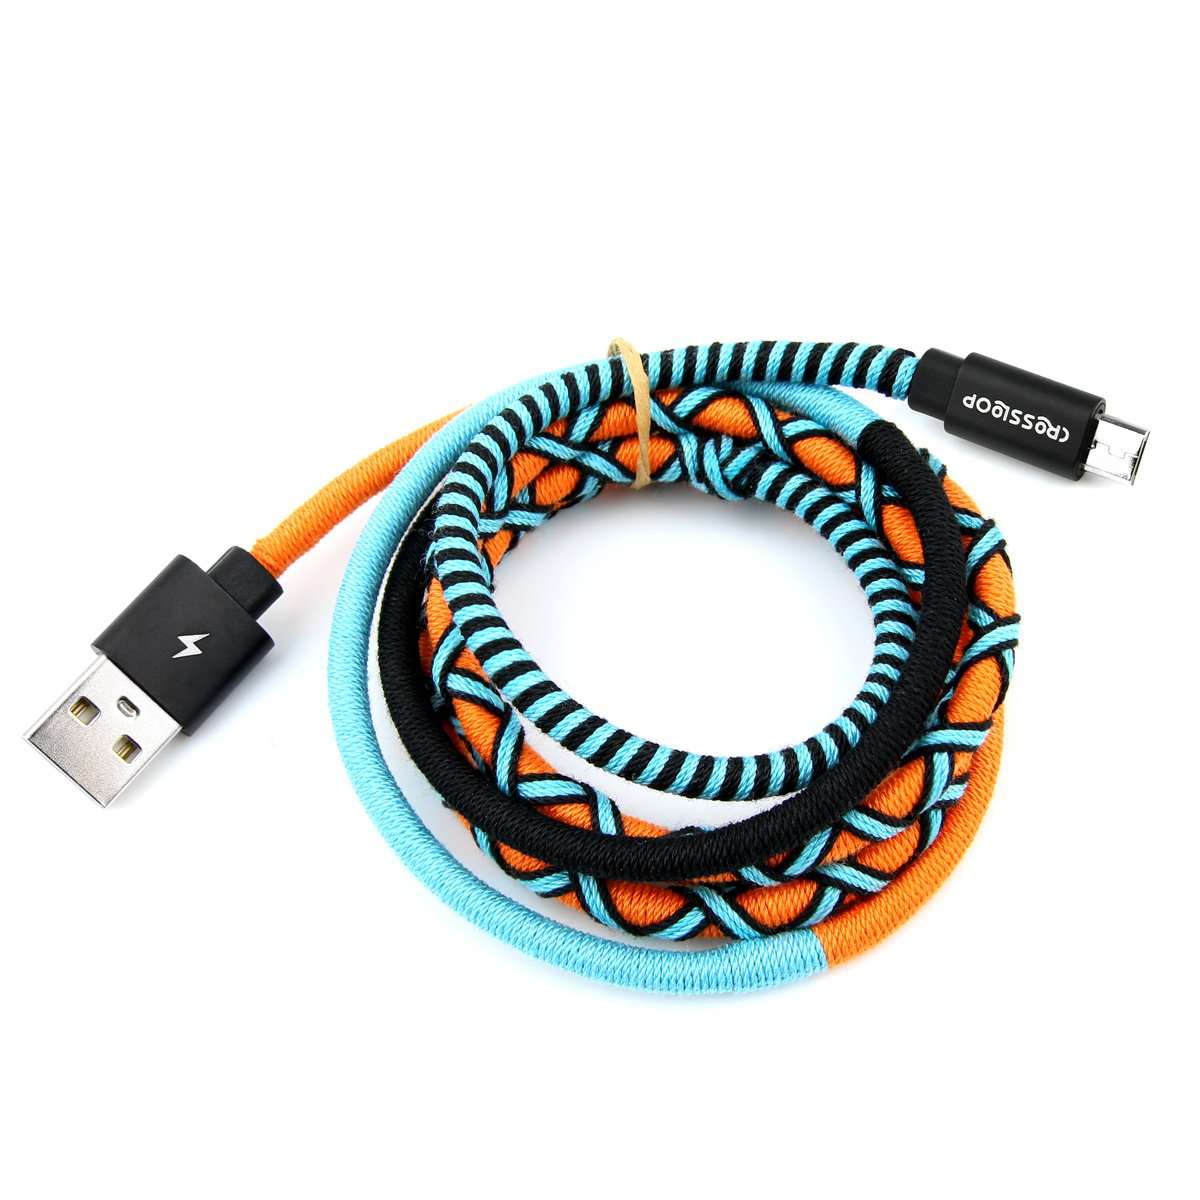 Micro USB Fast Charging Cable - Orange & Blue